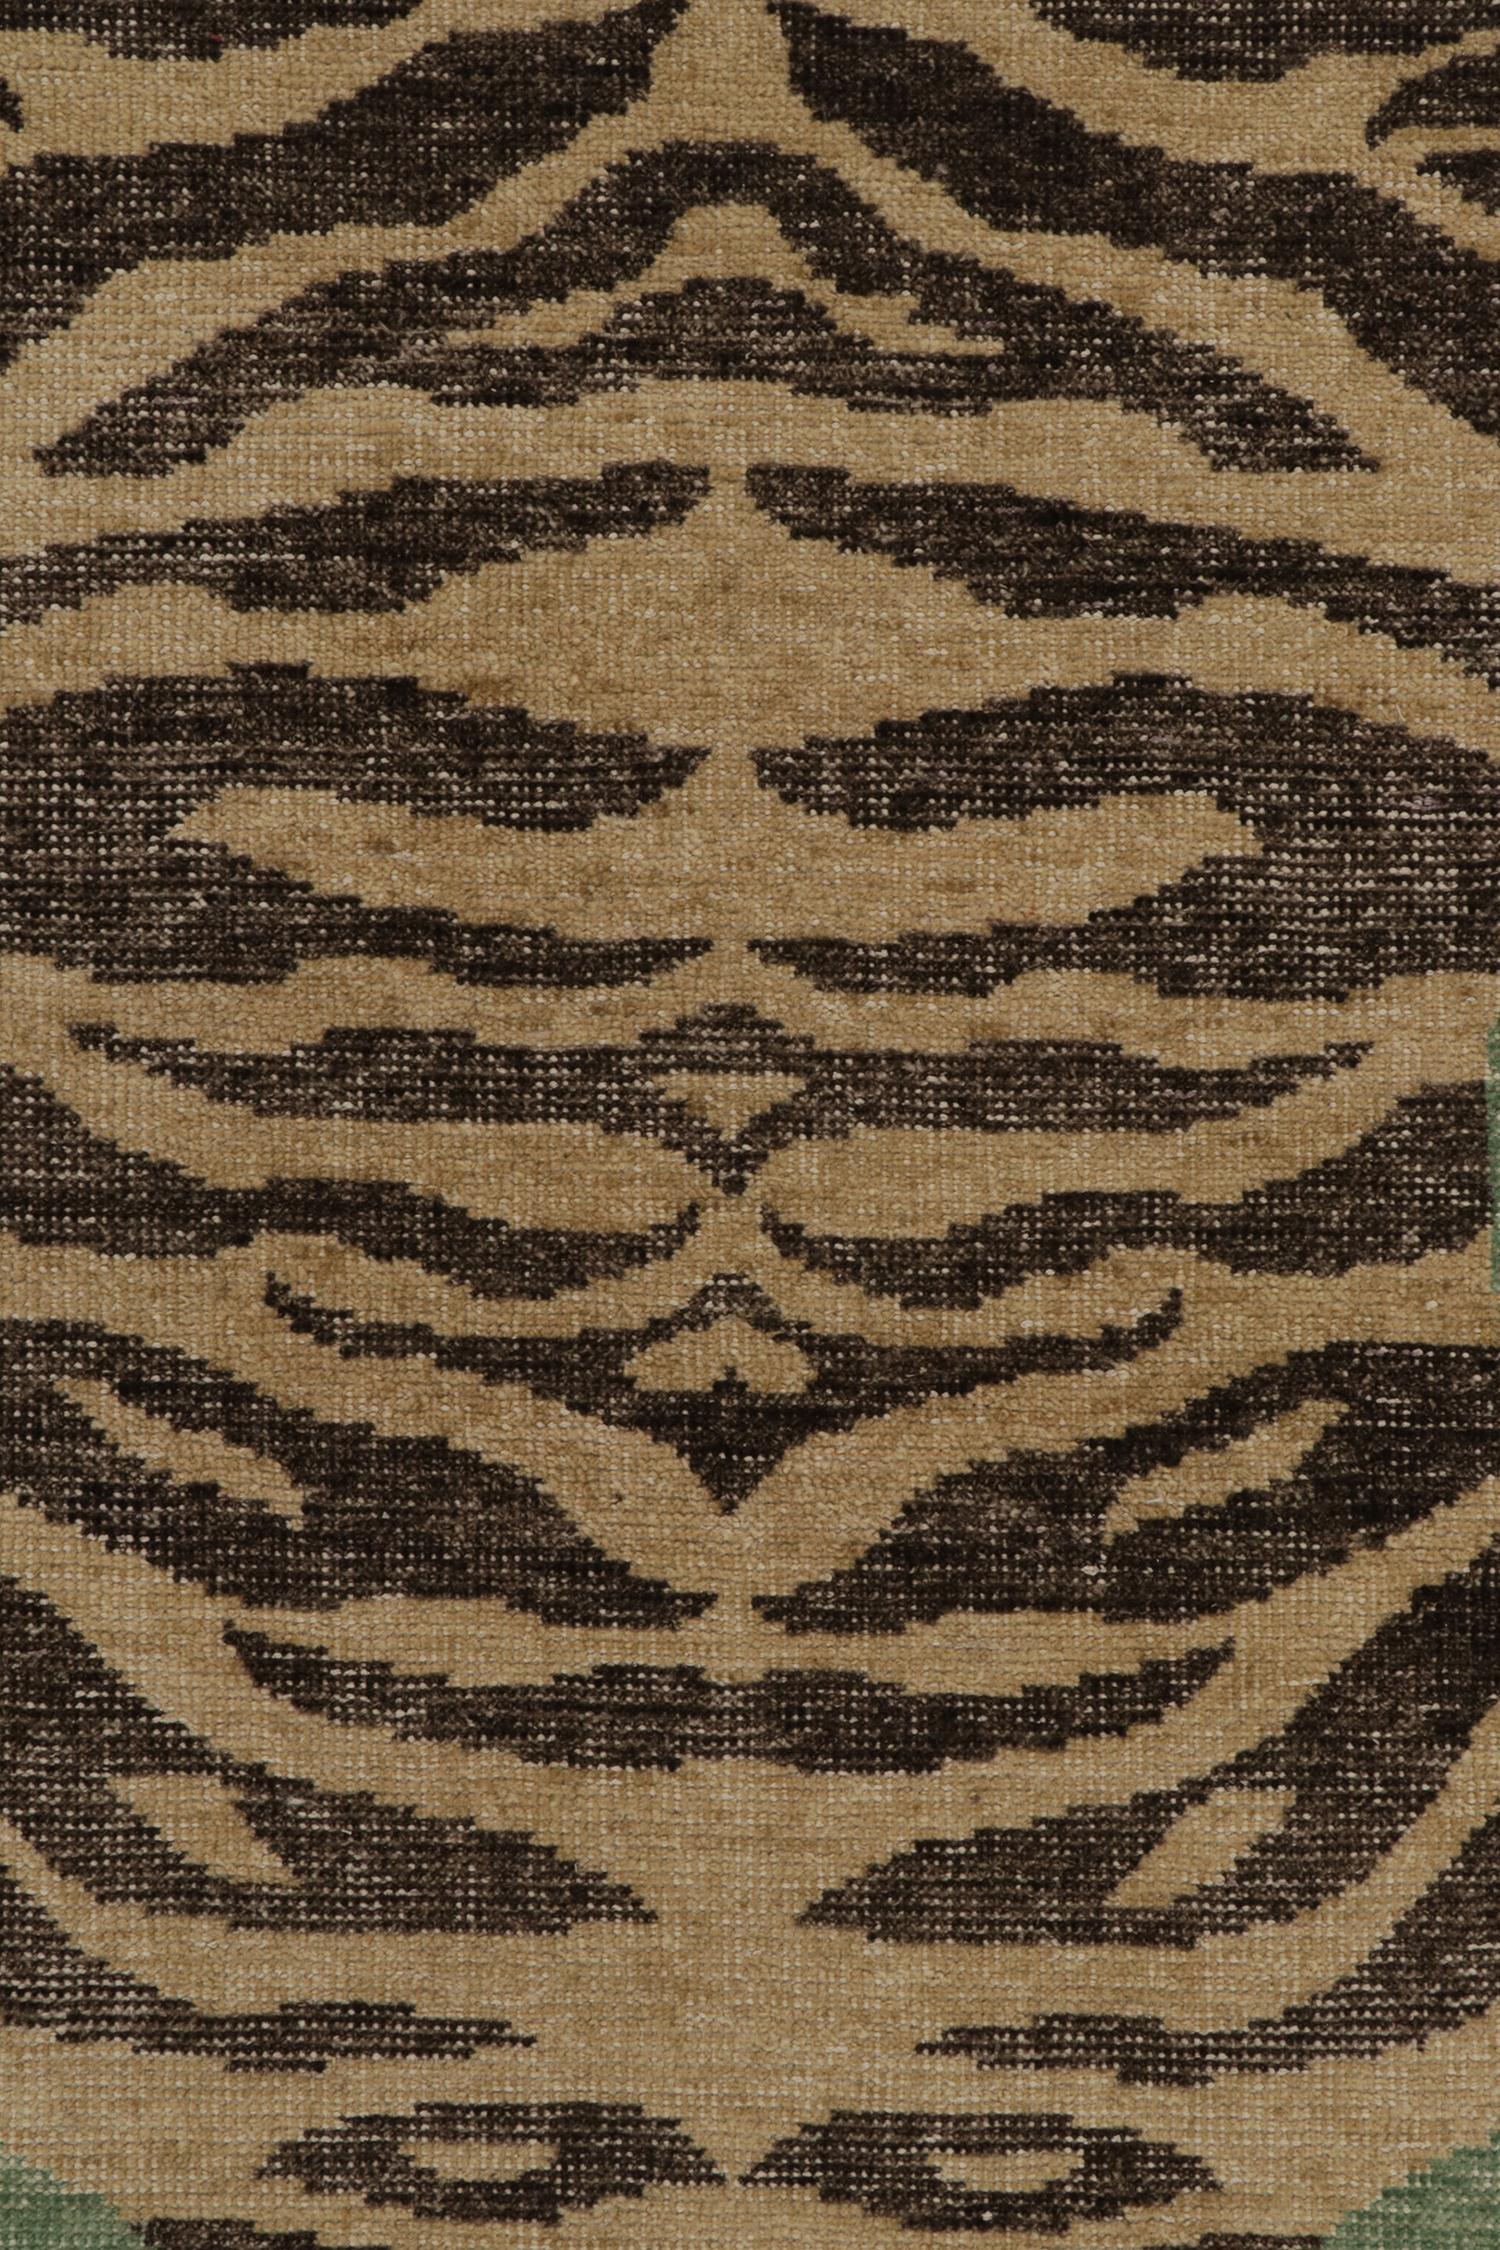 Rug & Kilim’s Distressed Tiger Skin Style Rug in Green, Beige & Black Pictorial In New Condition For Sale In Long Island City, NY